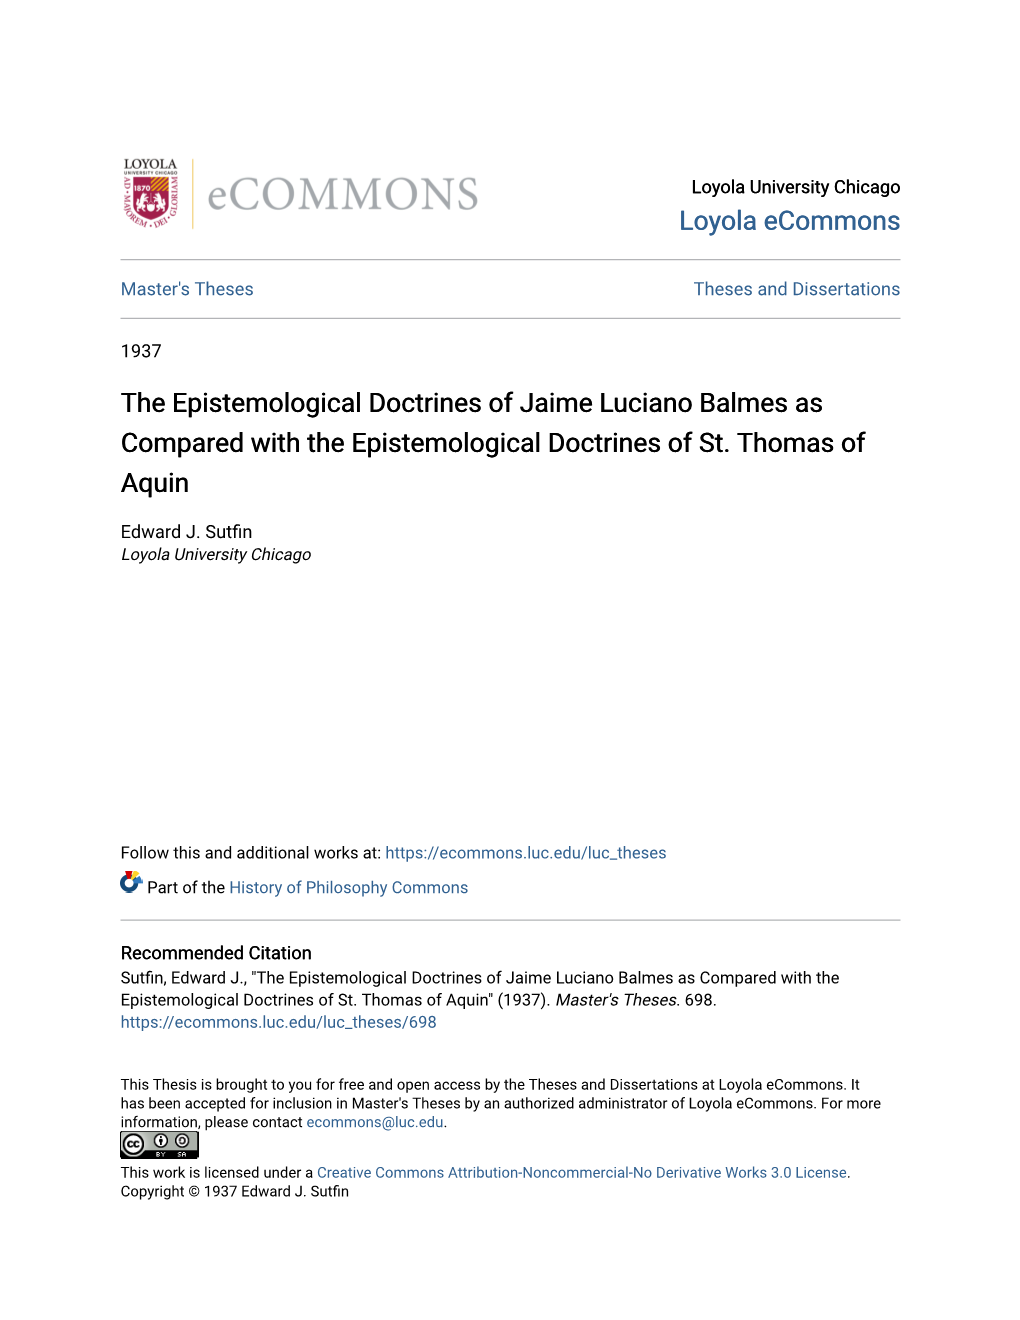 The Epistemological Doctrines of Jaime Luciano Balmes As Compared with the Epistemological Doctrines of St